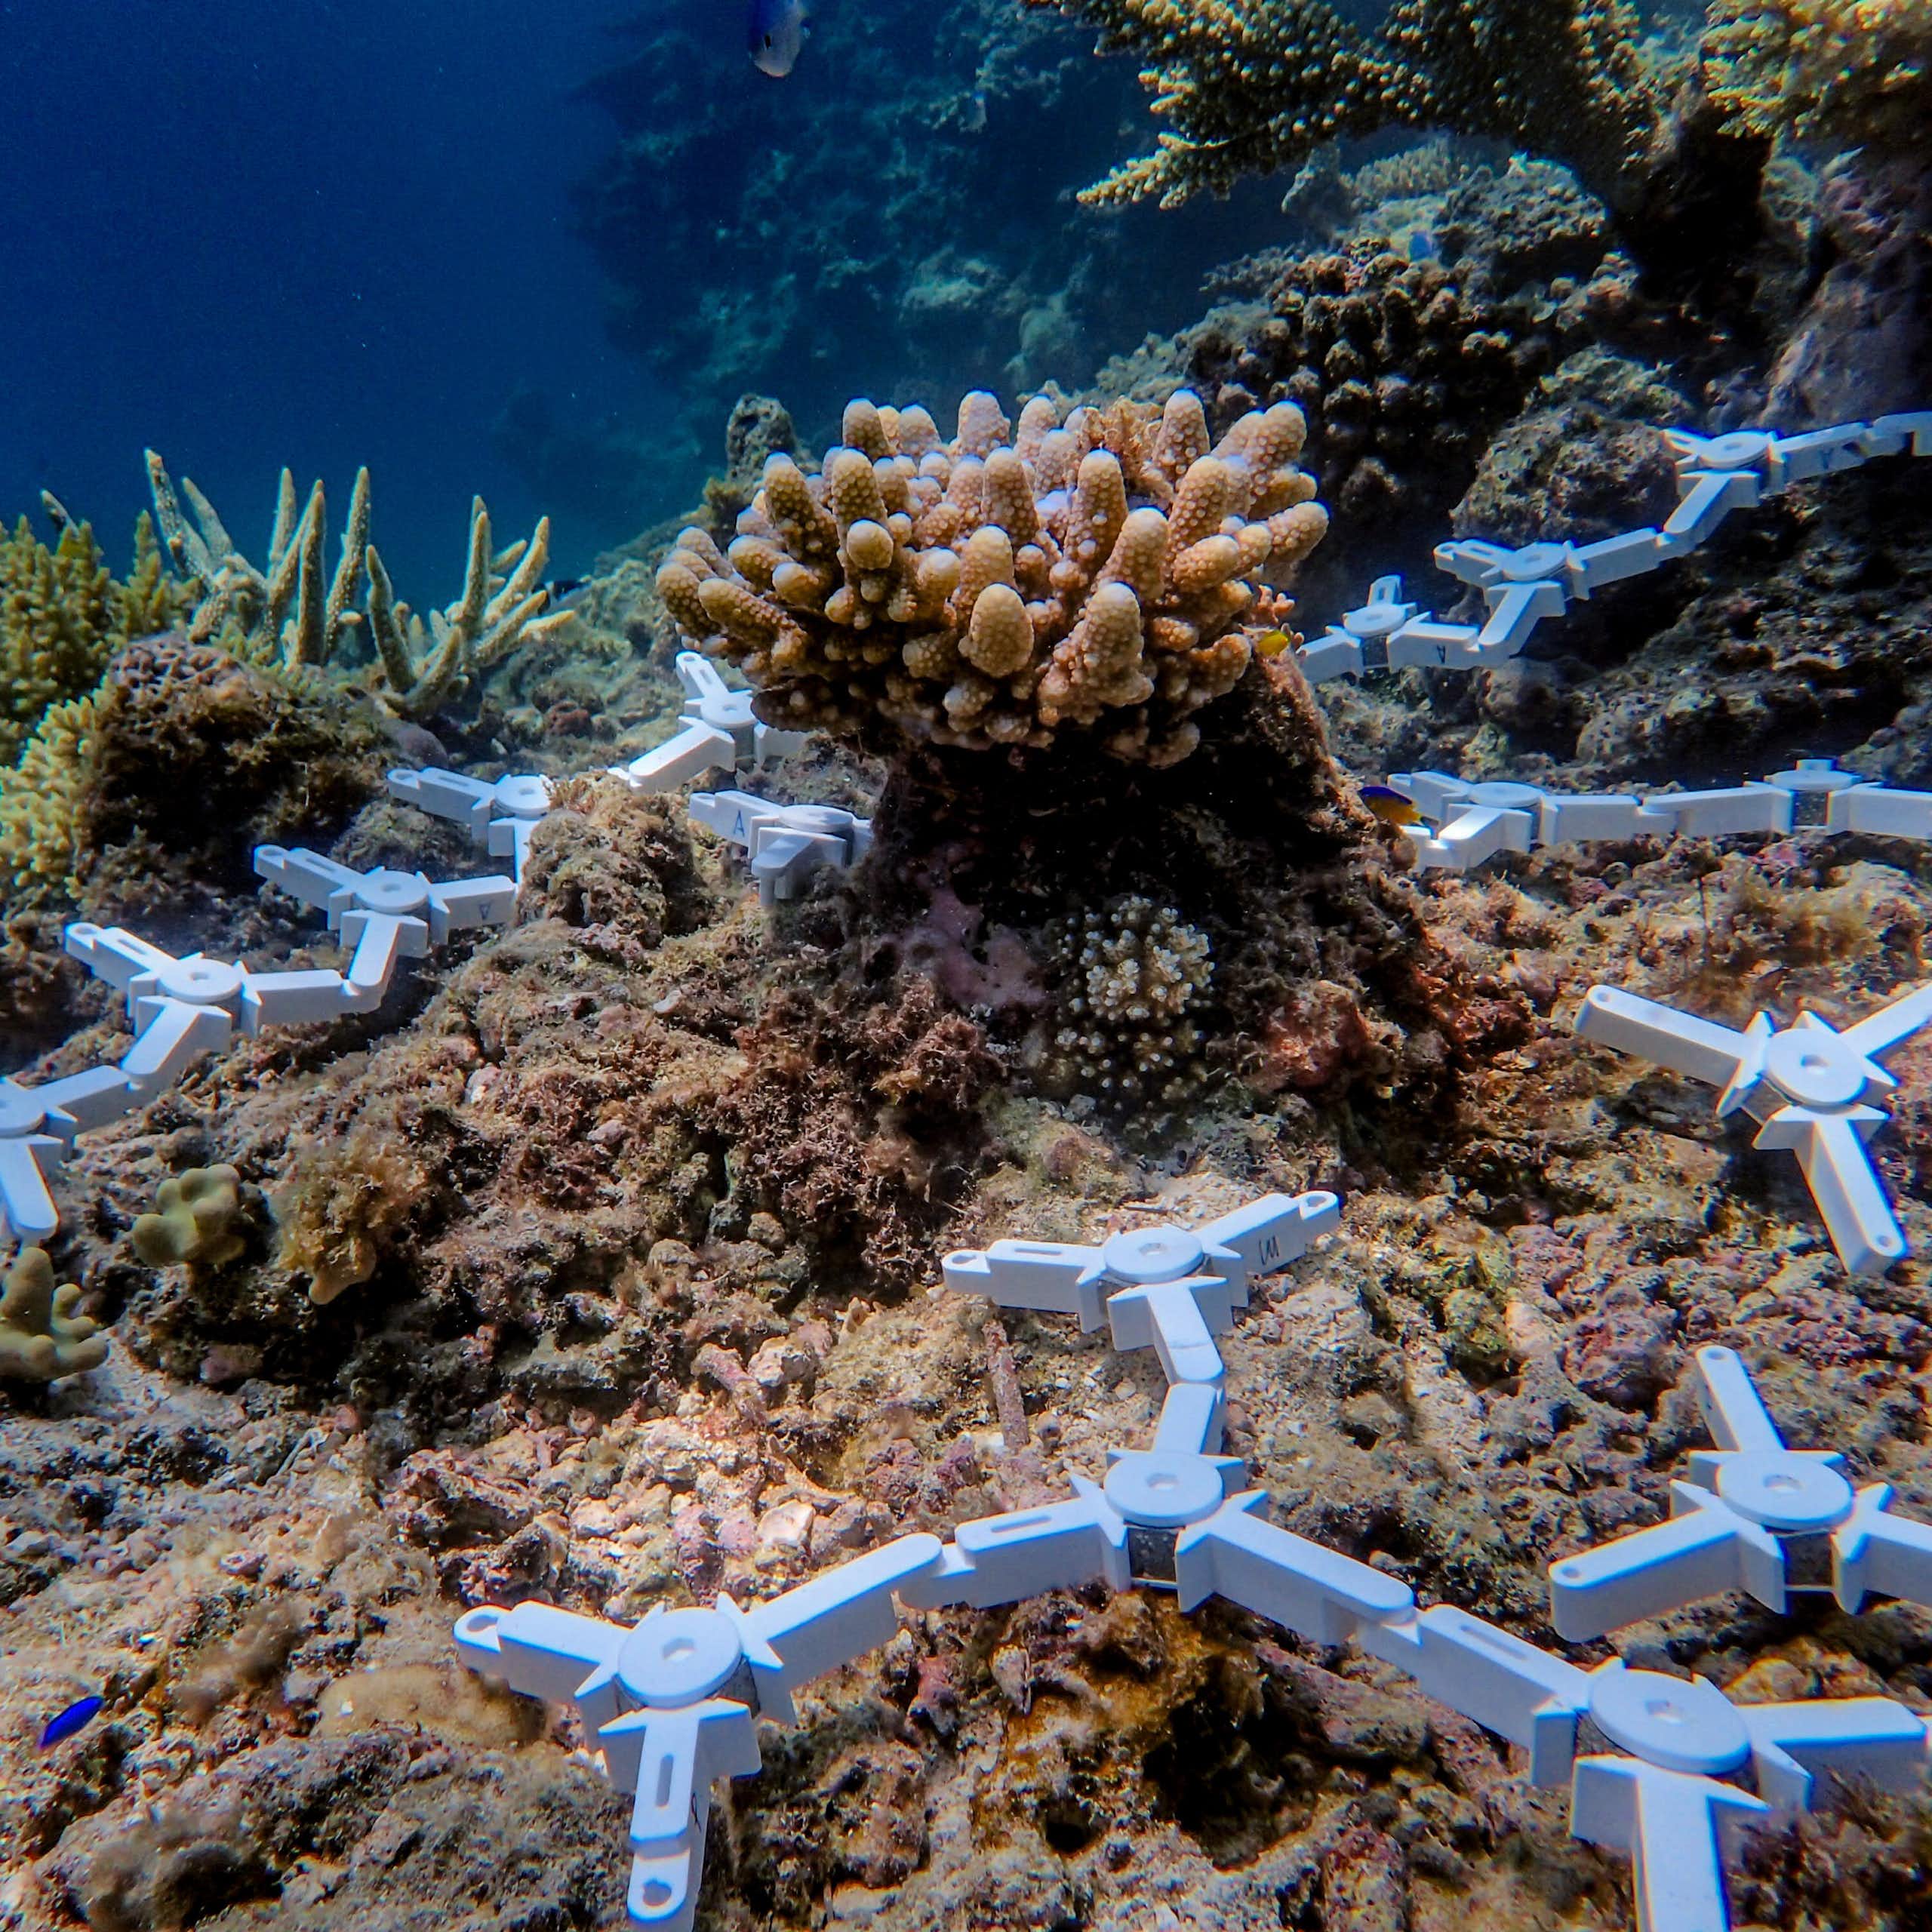 Ceramic coral seeding devices, each holding around 10 young corals on the surface of the reef on the central Great Barrier Reef.